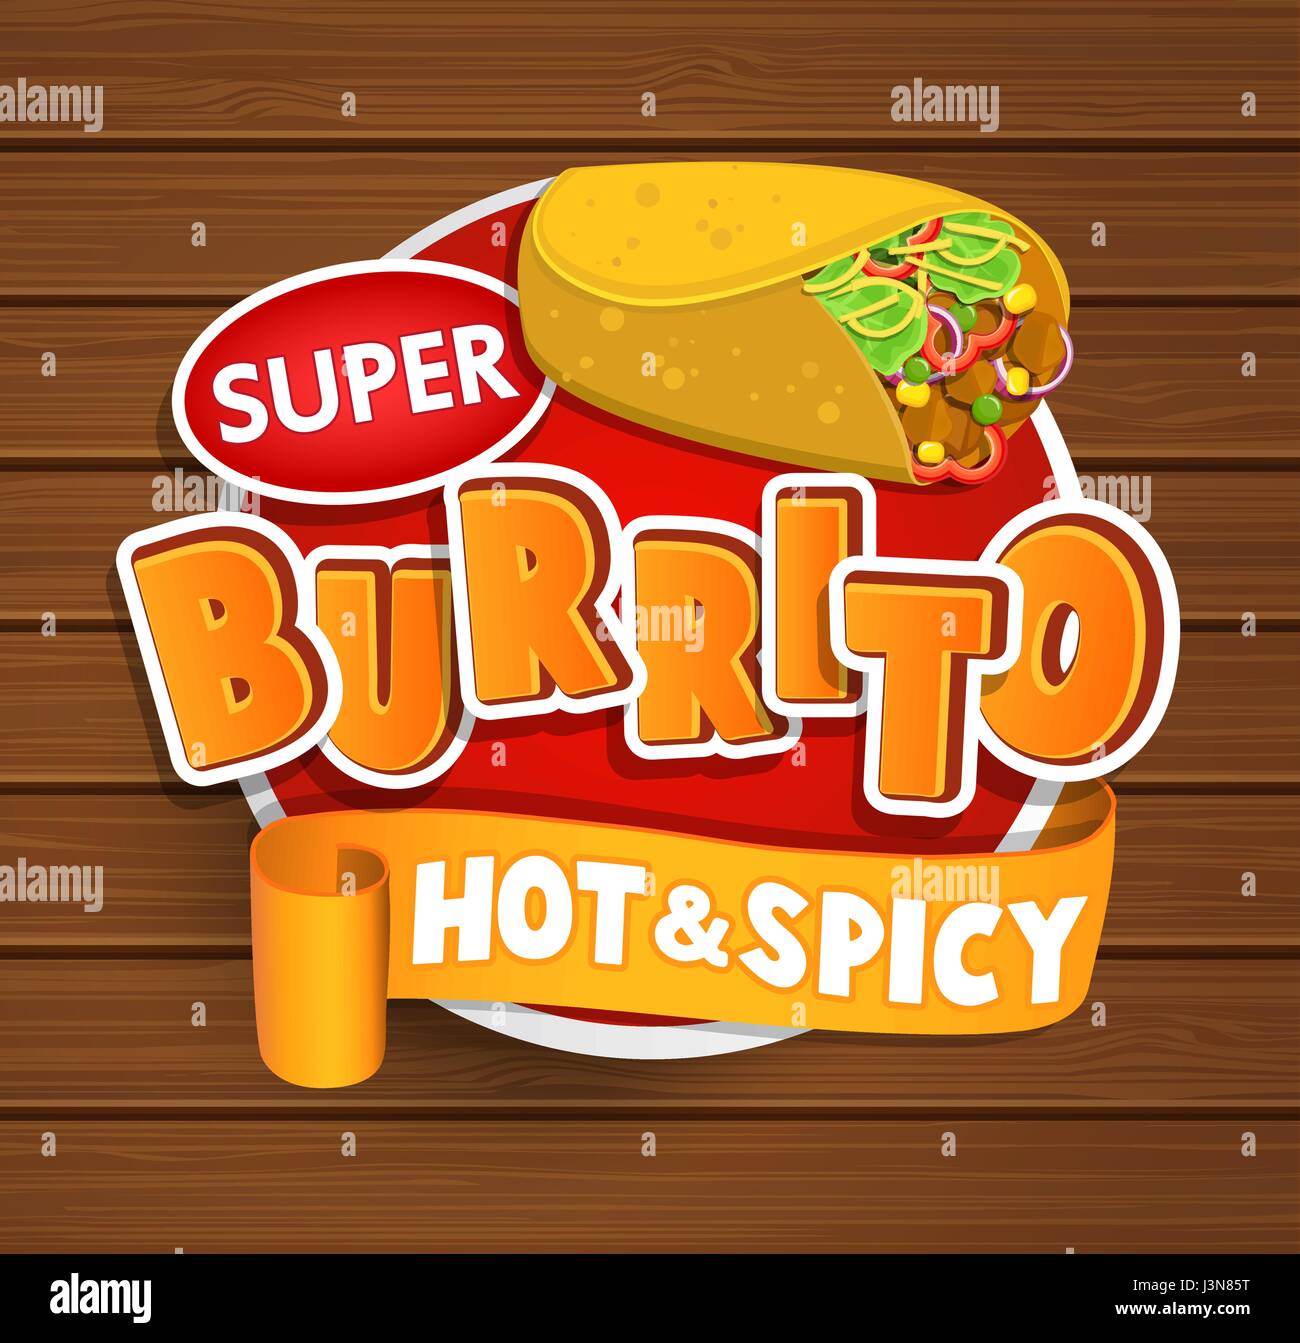 Burrito hot and spicy logo and food label or sticker. Concept of mexican food, traditional product design for shops, markets.Vector illustration. Stock Vector